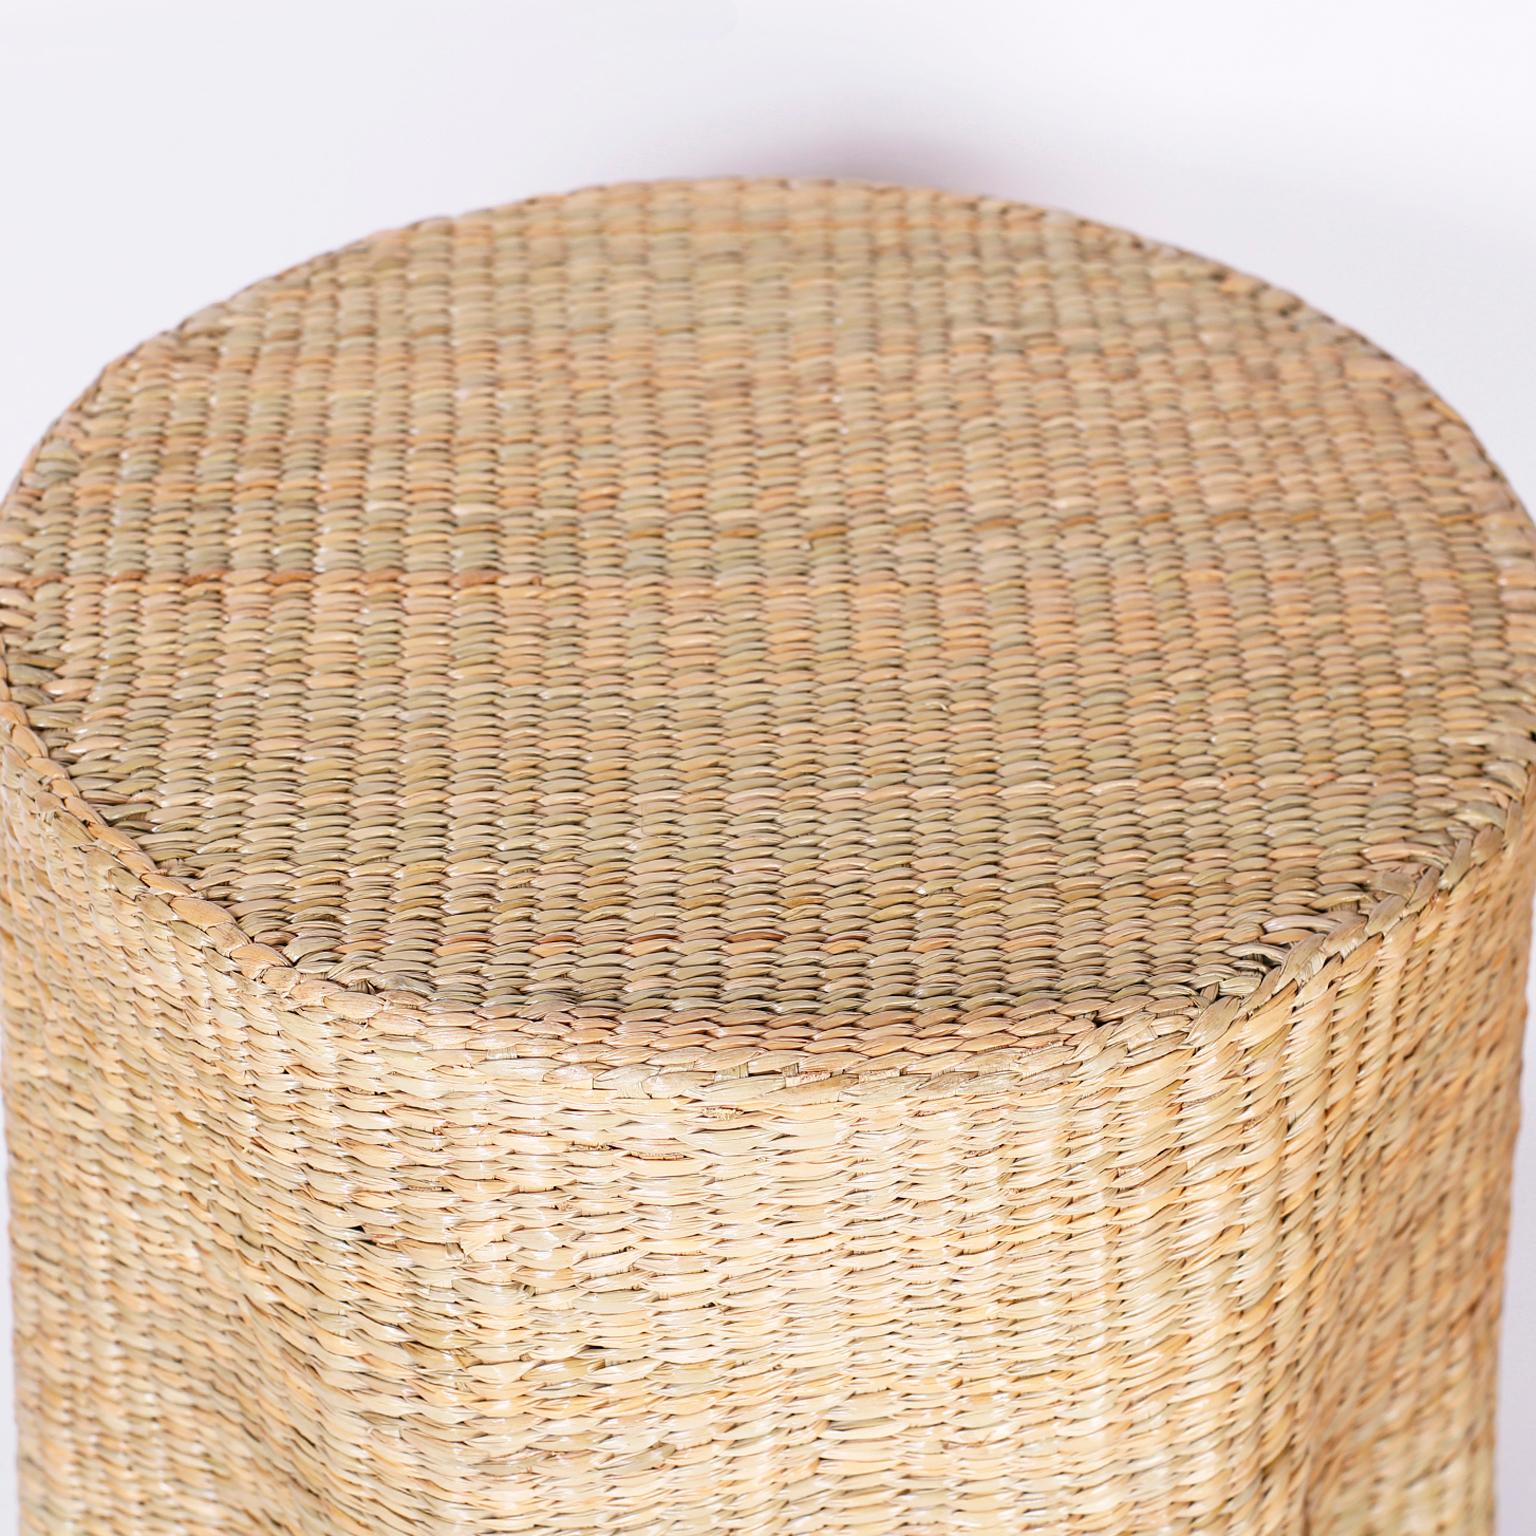 Contemporary Pair of Wicker Drapery Ghost Tables or Stands from the FS Flores Collection